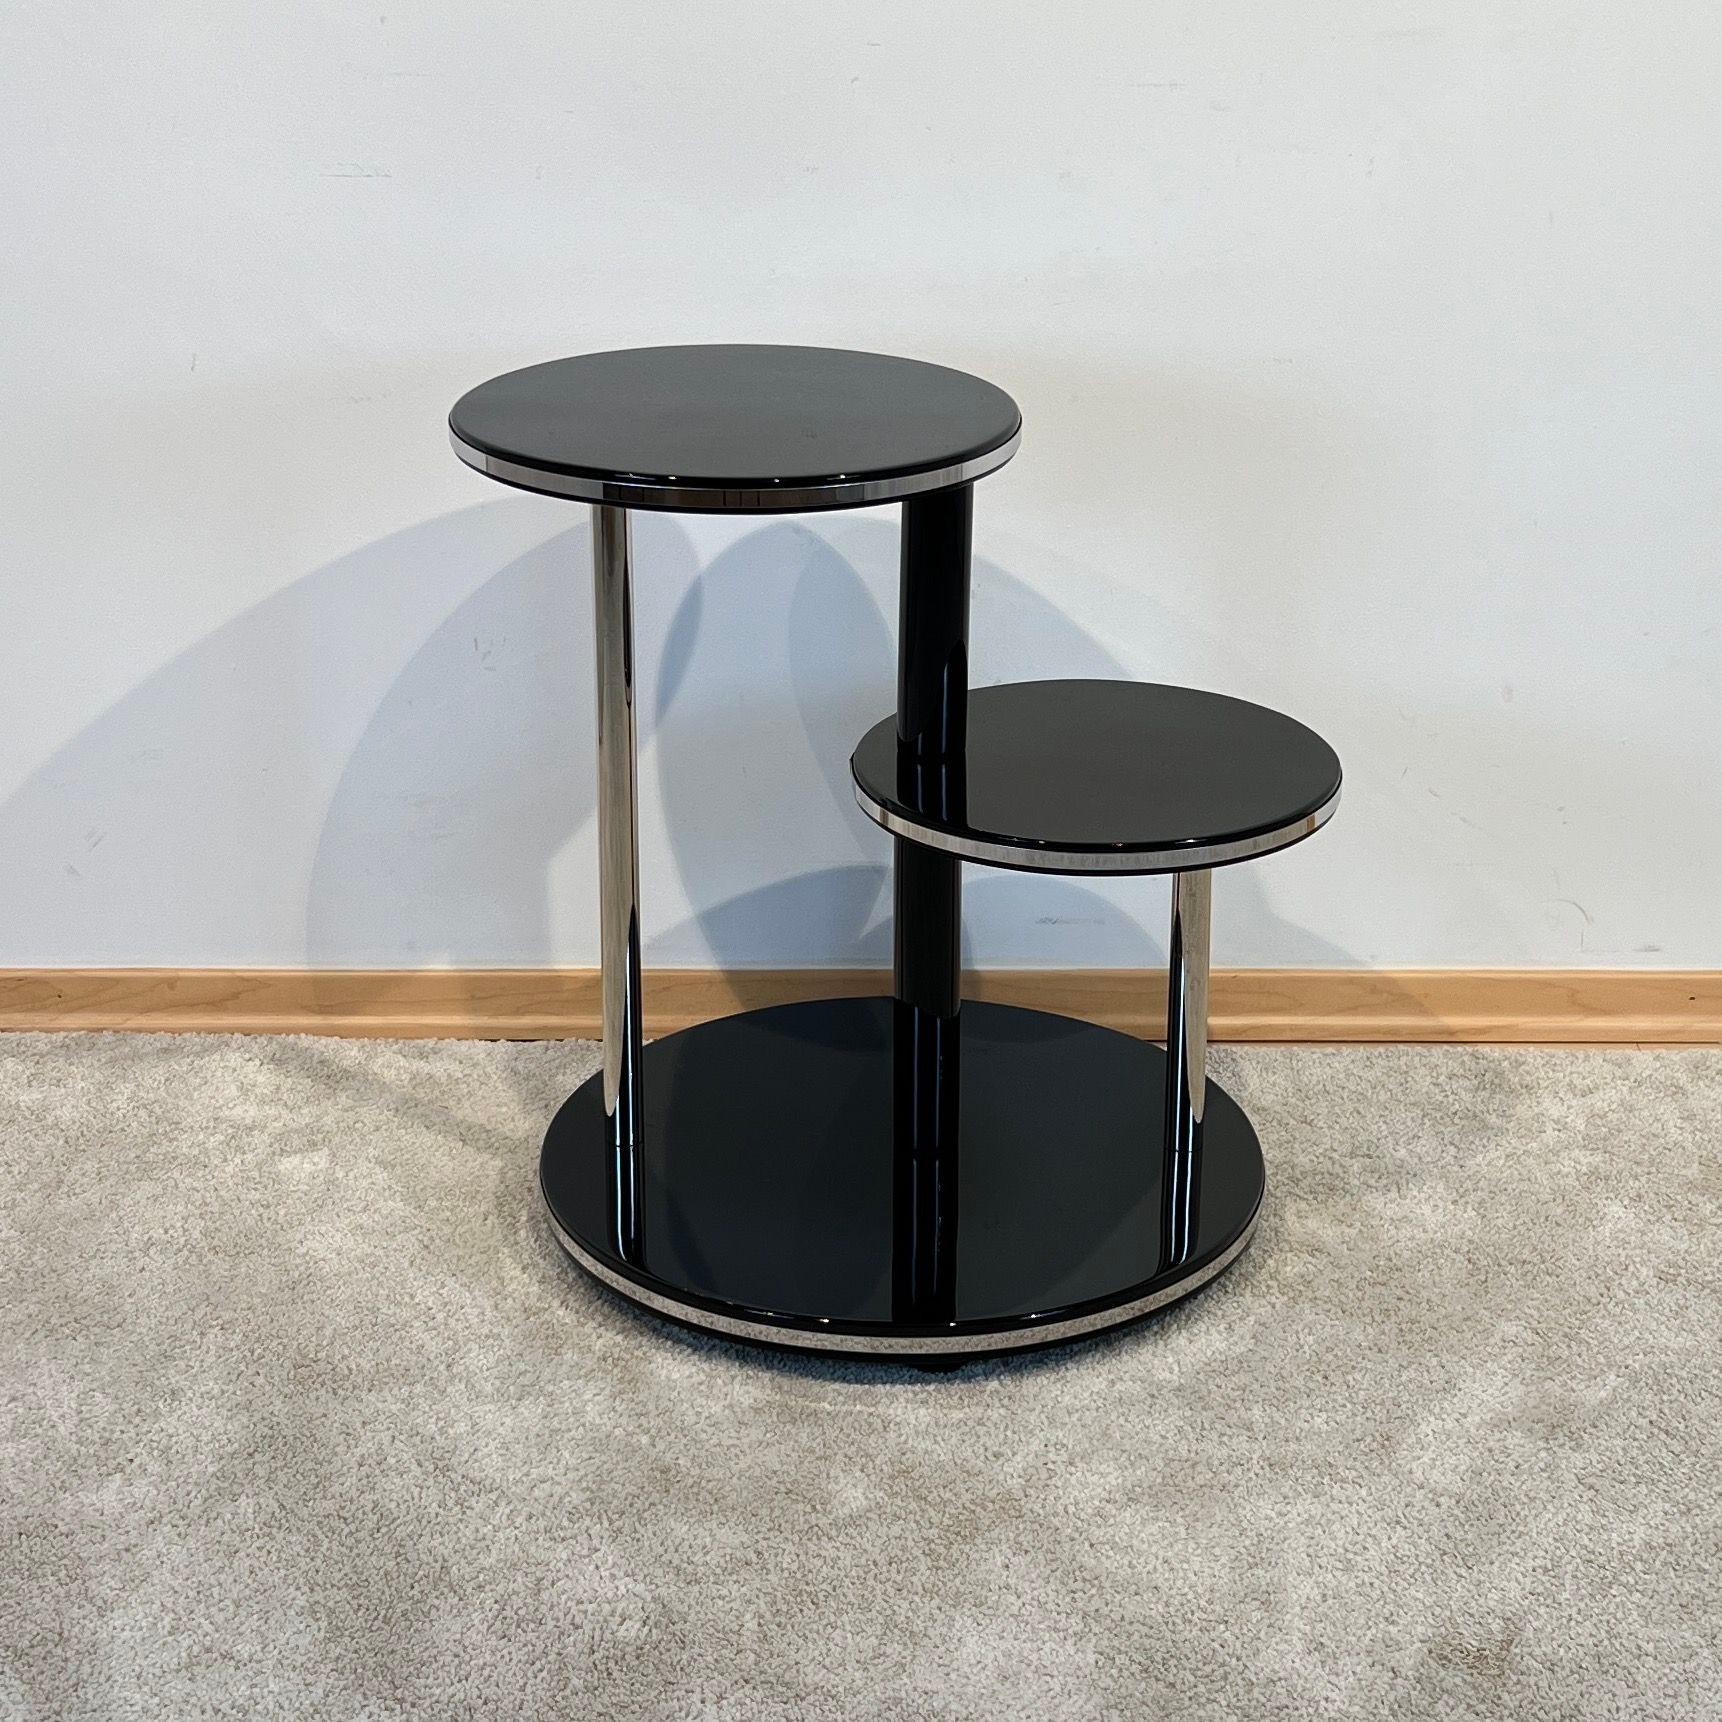 French Art Deco Round Side Table, Black Lacquer, Chrome, Metal Trims, France circa 1930 For Sale